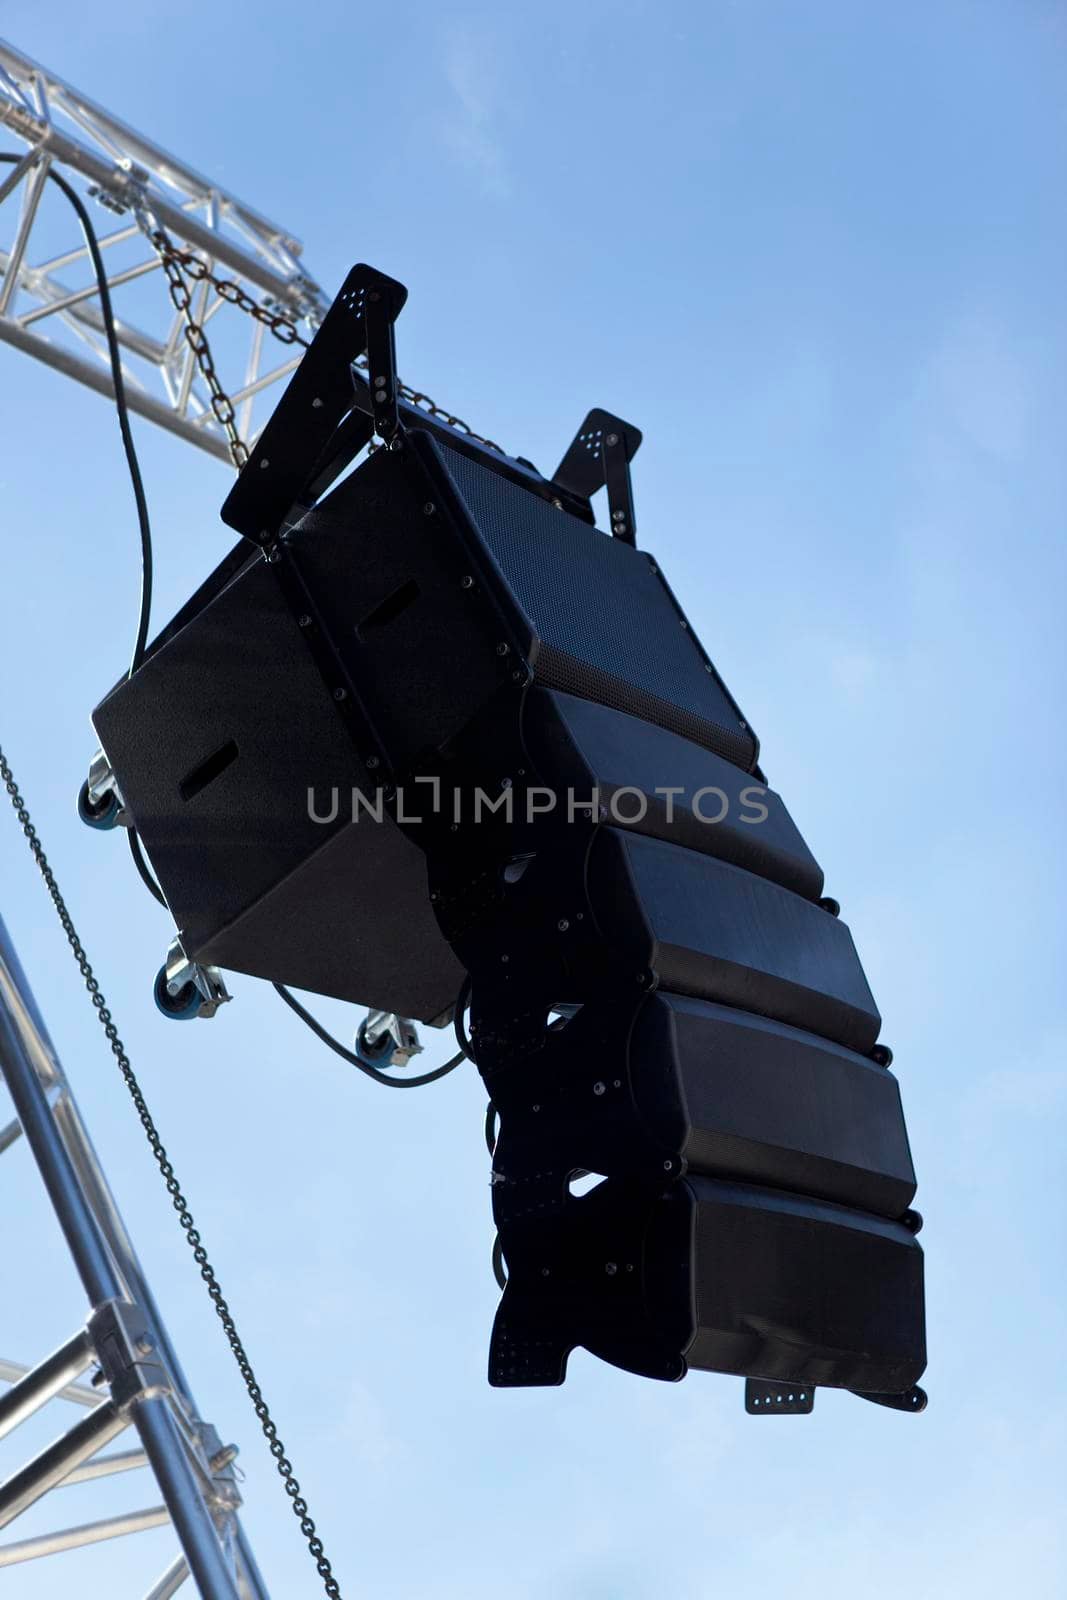 Loudspeaker in front of a stage for a music festival